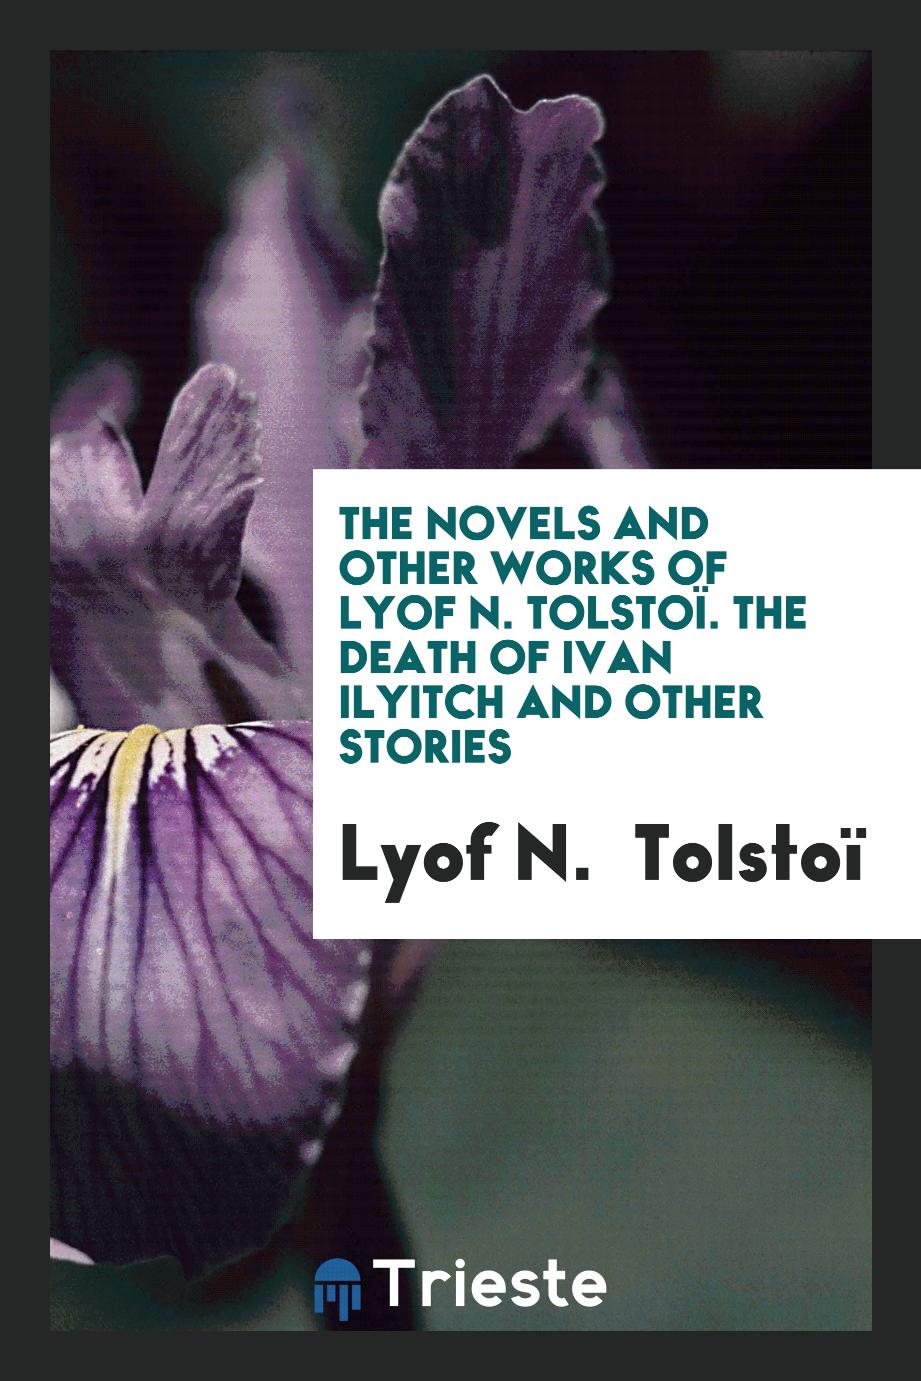 The novels and other works of Lyof N. Tolstoï. The death of Ivan Ilyitch and other stories